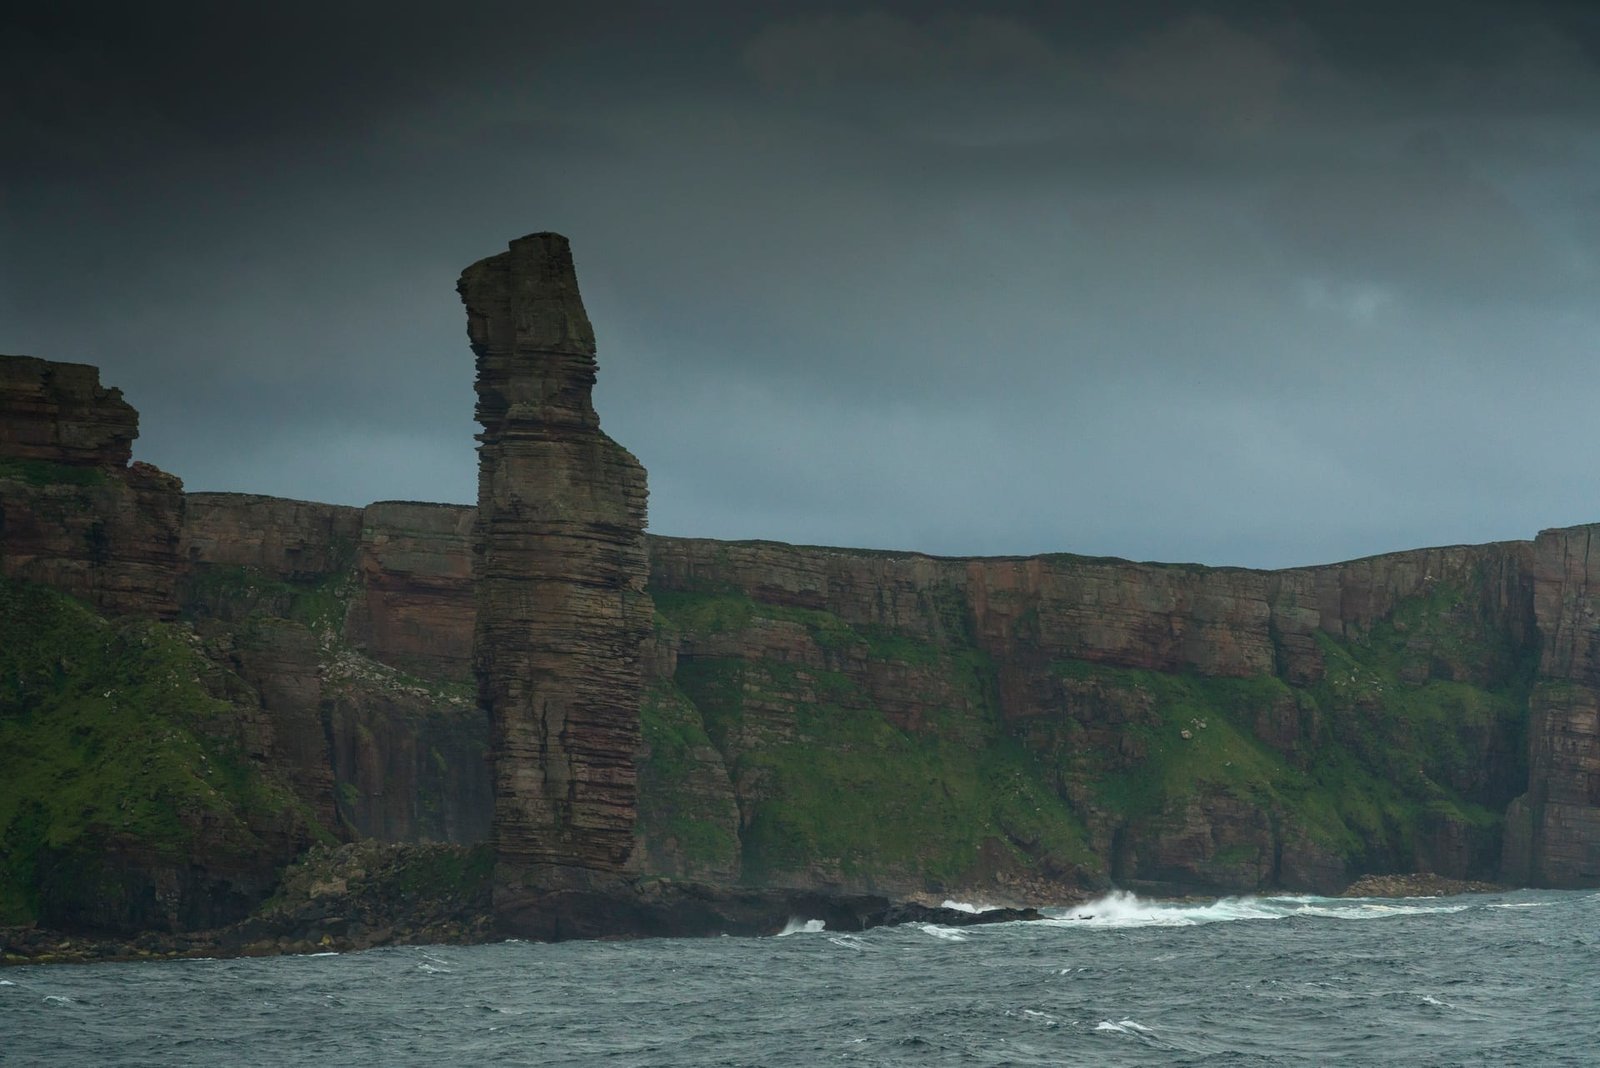 The Old Man of Hoy seen from the ferry from Stromness to Scrabster